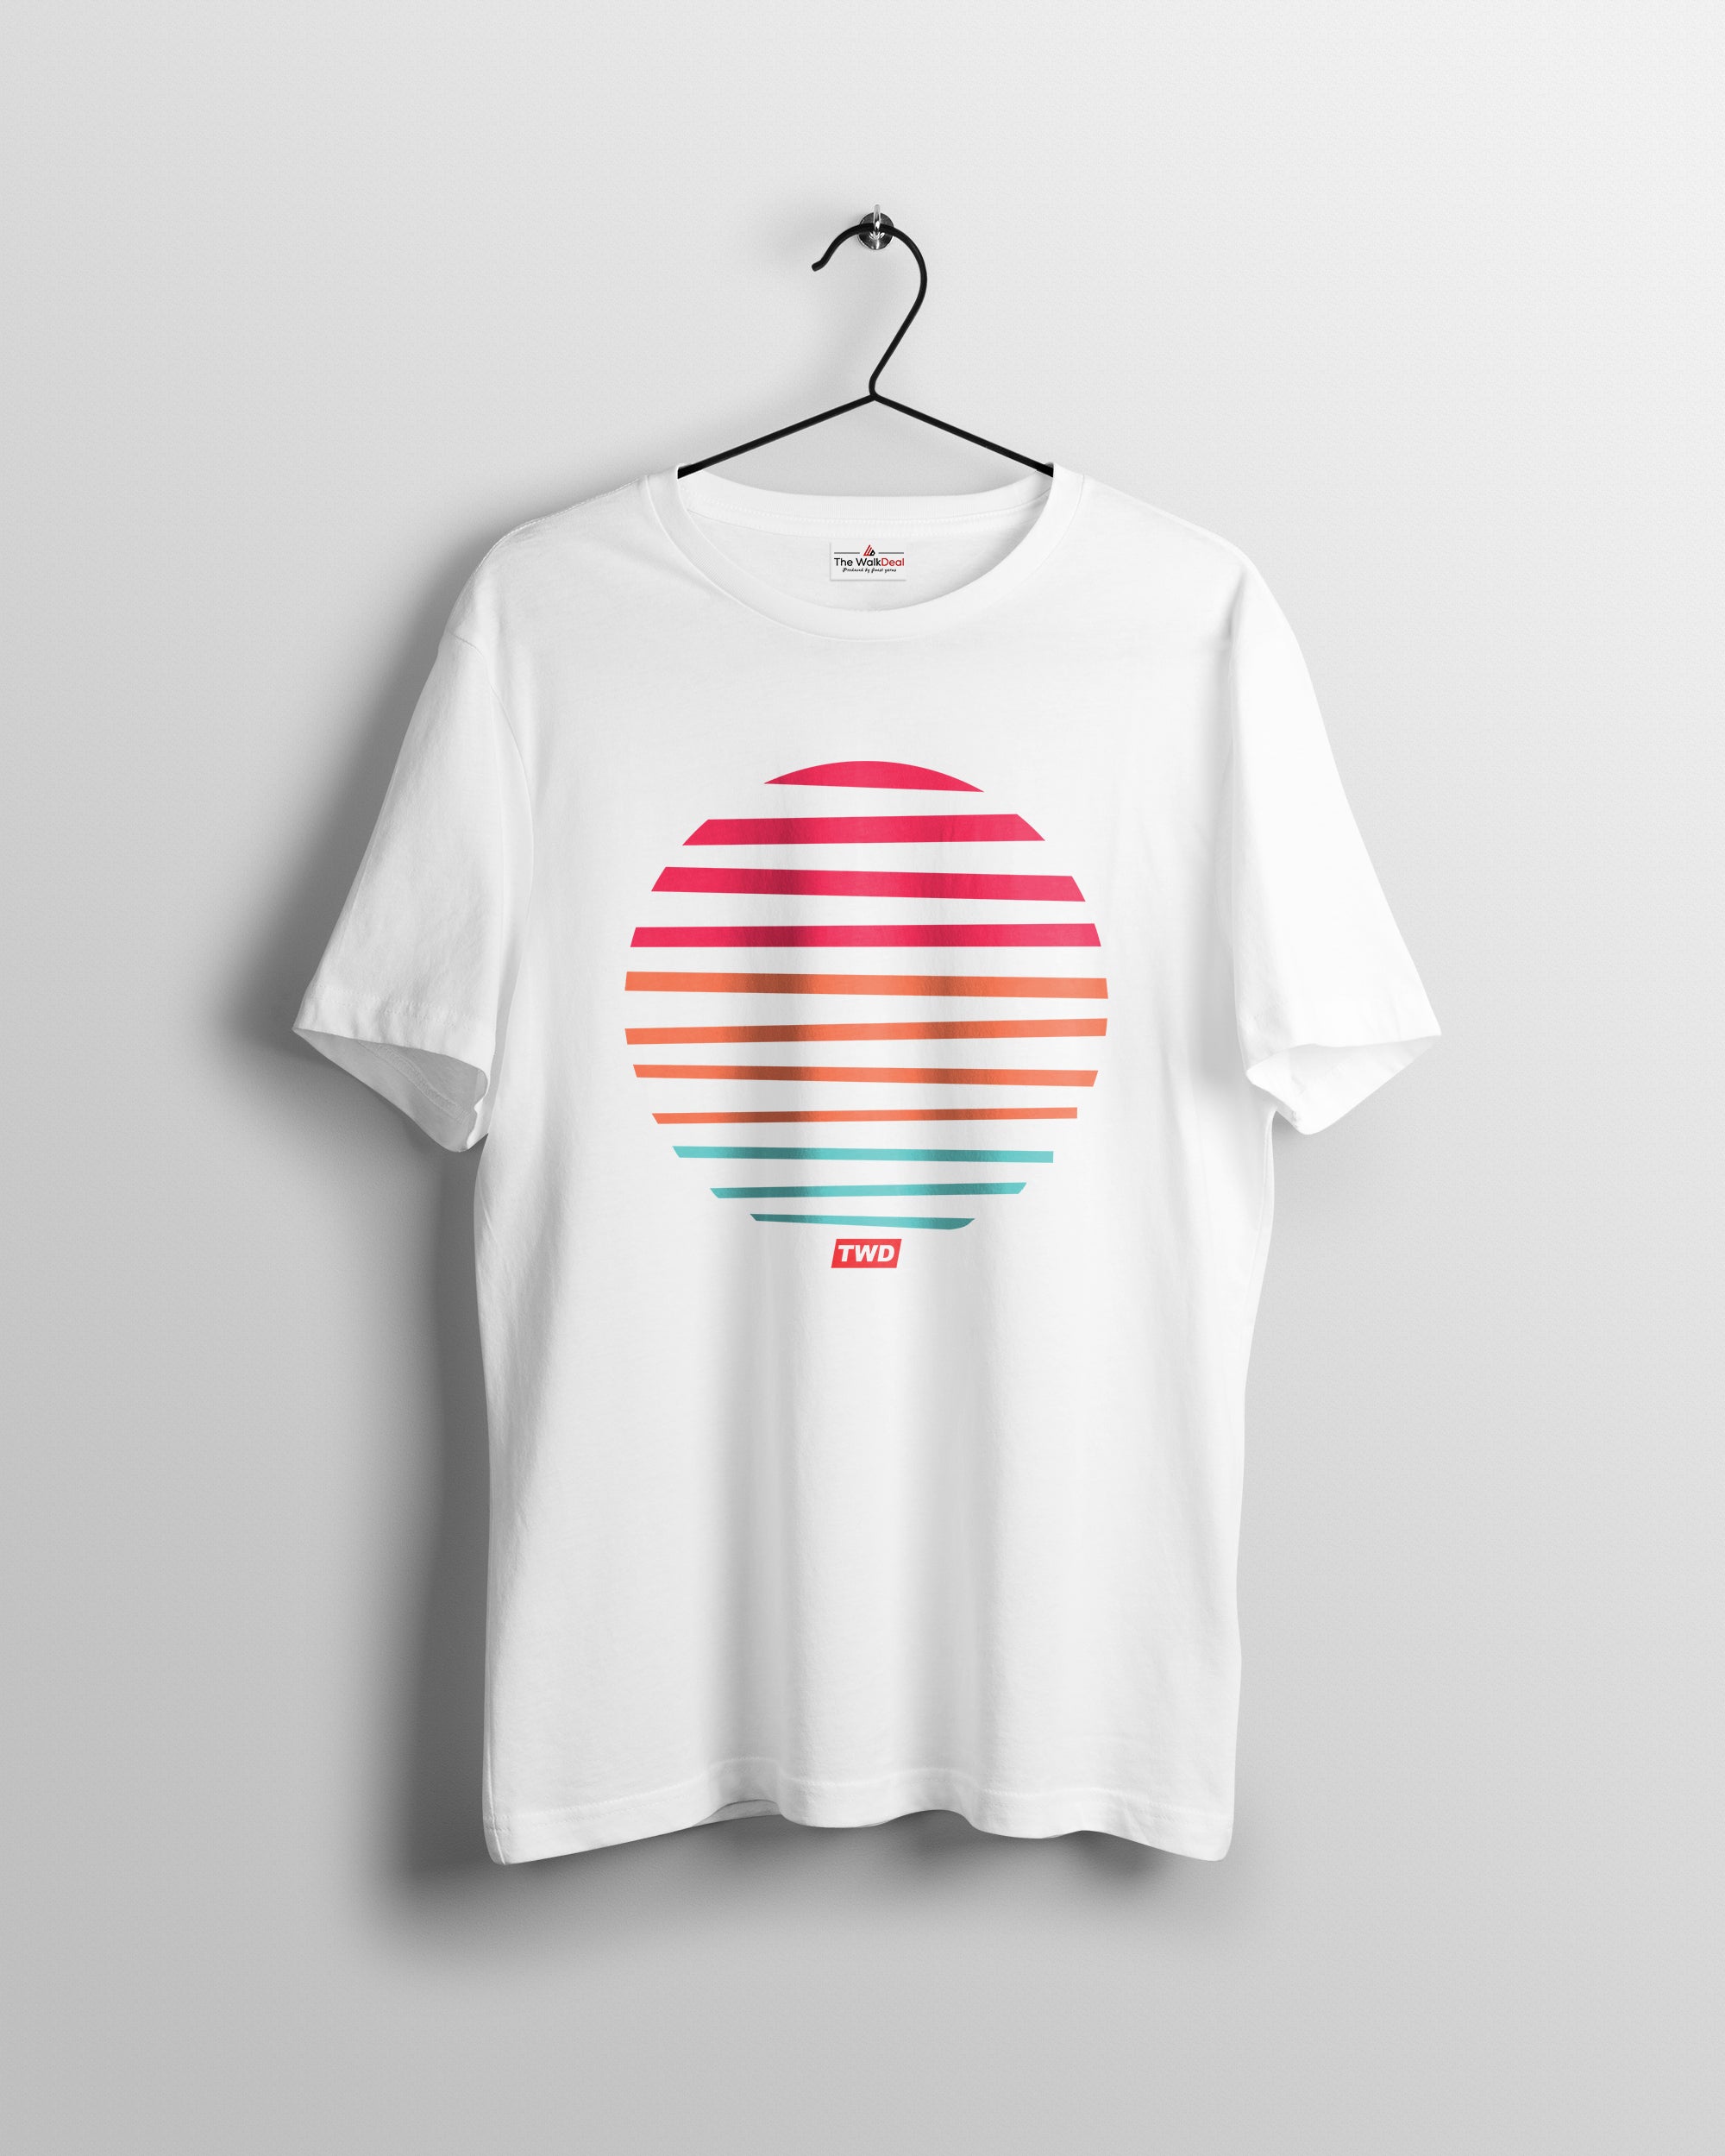 Shades Of Sun T-Shirts For Men || White || Stylish Tshirts || 100% Cotton || Best T-Shirt For Men's